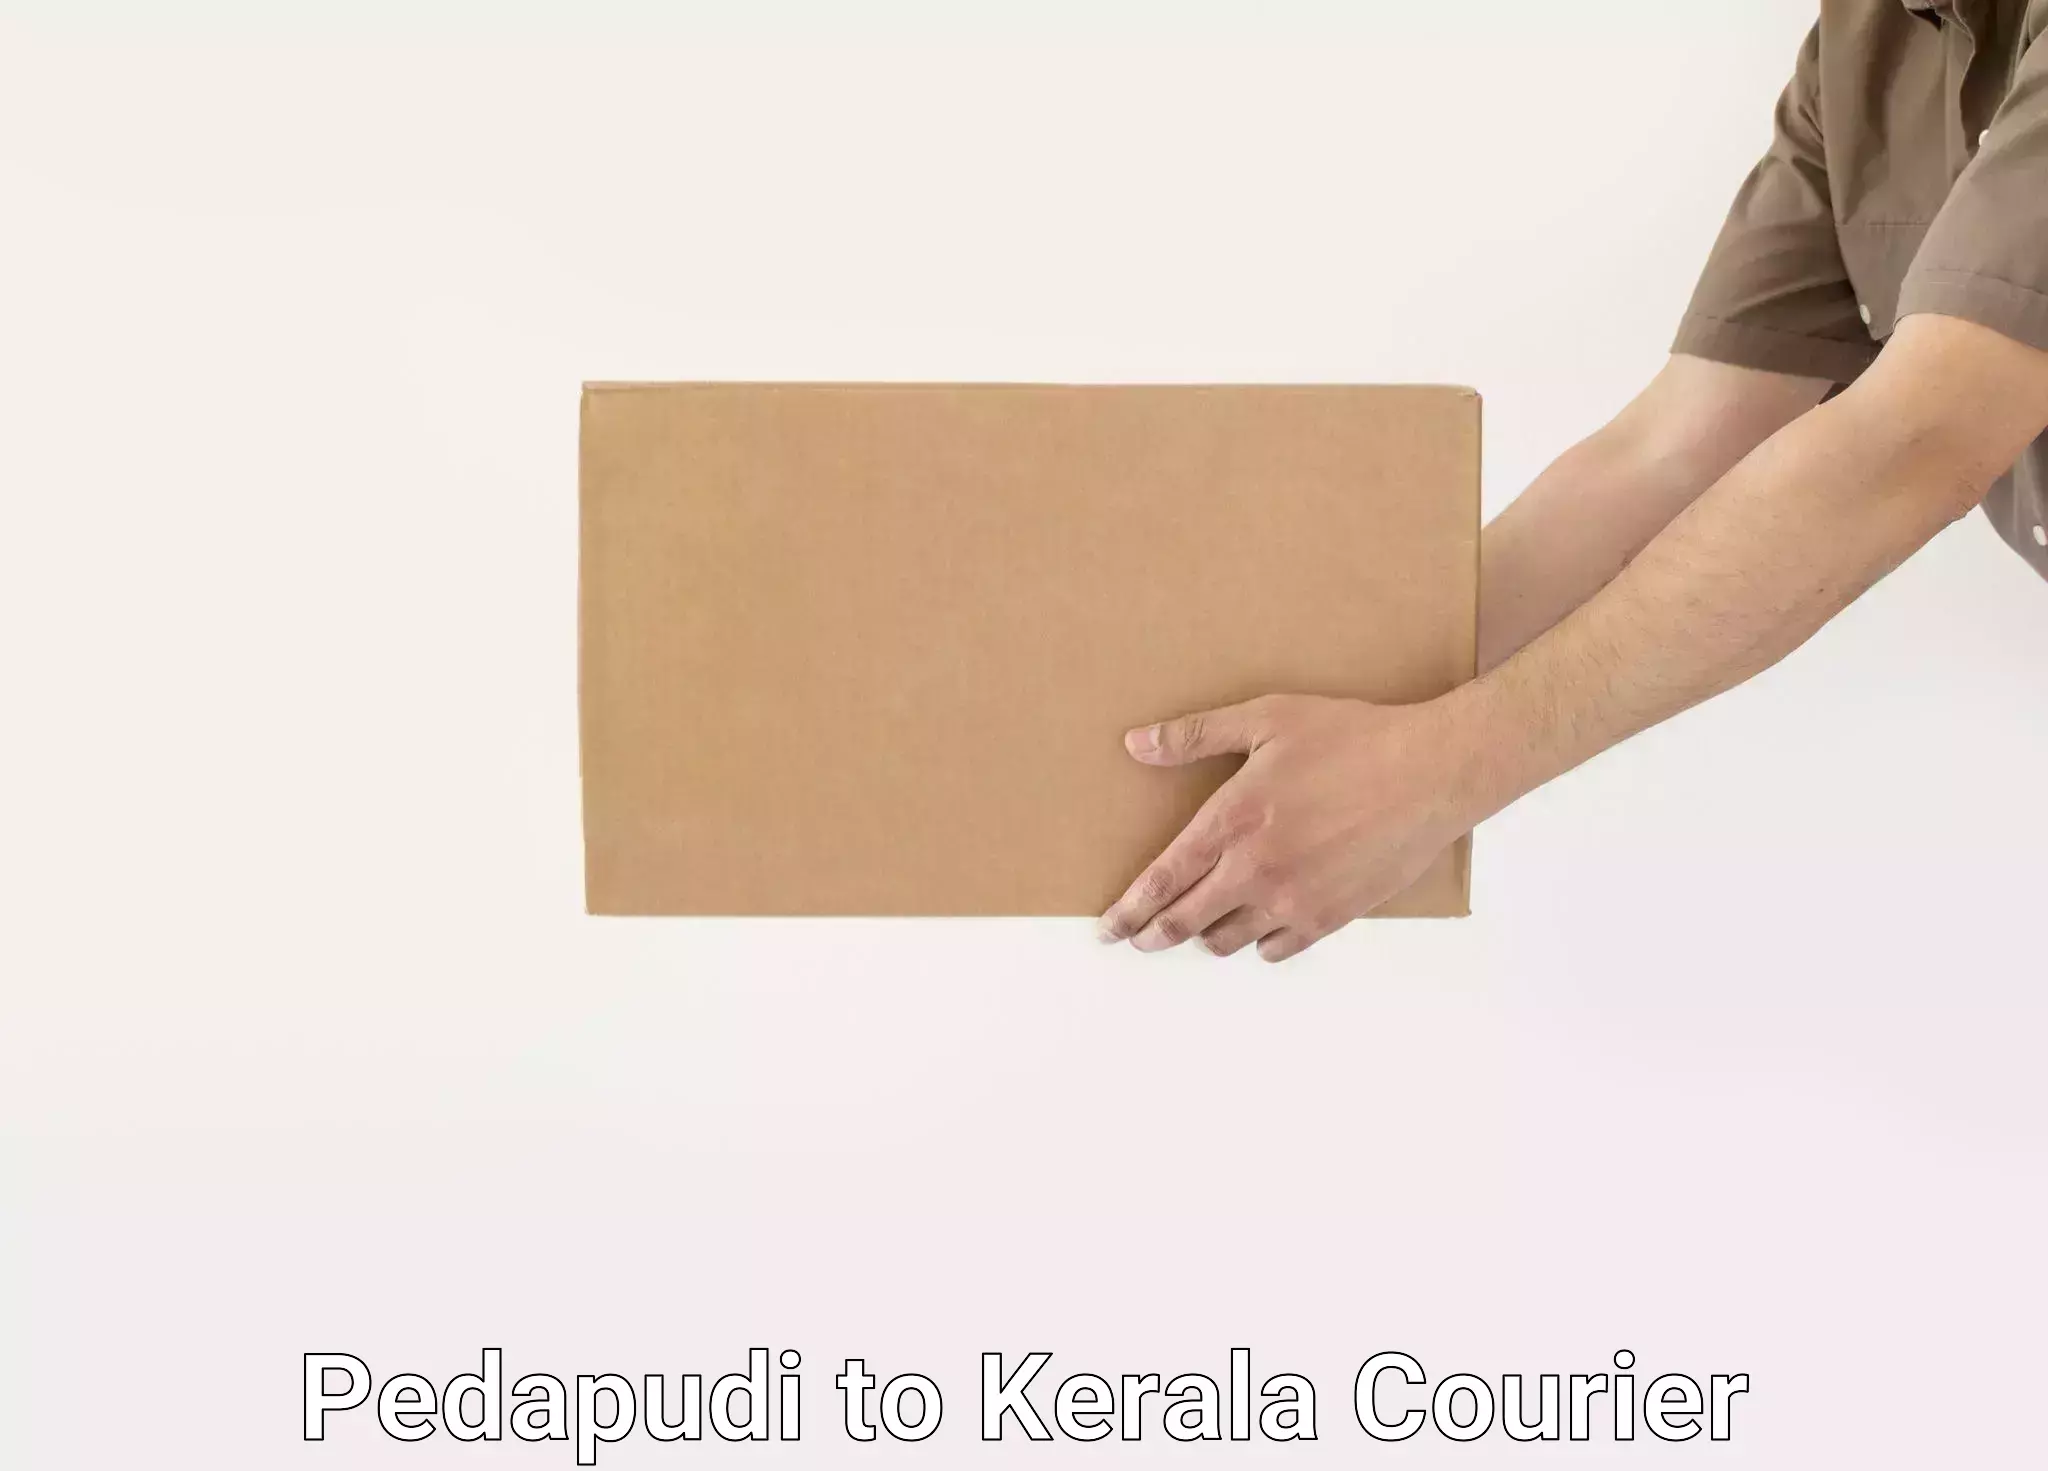 Efficient relocation services Pedapudi to Changanacherry